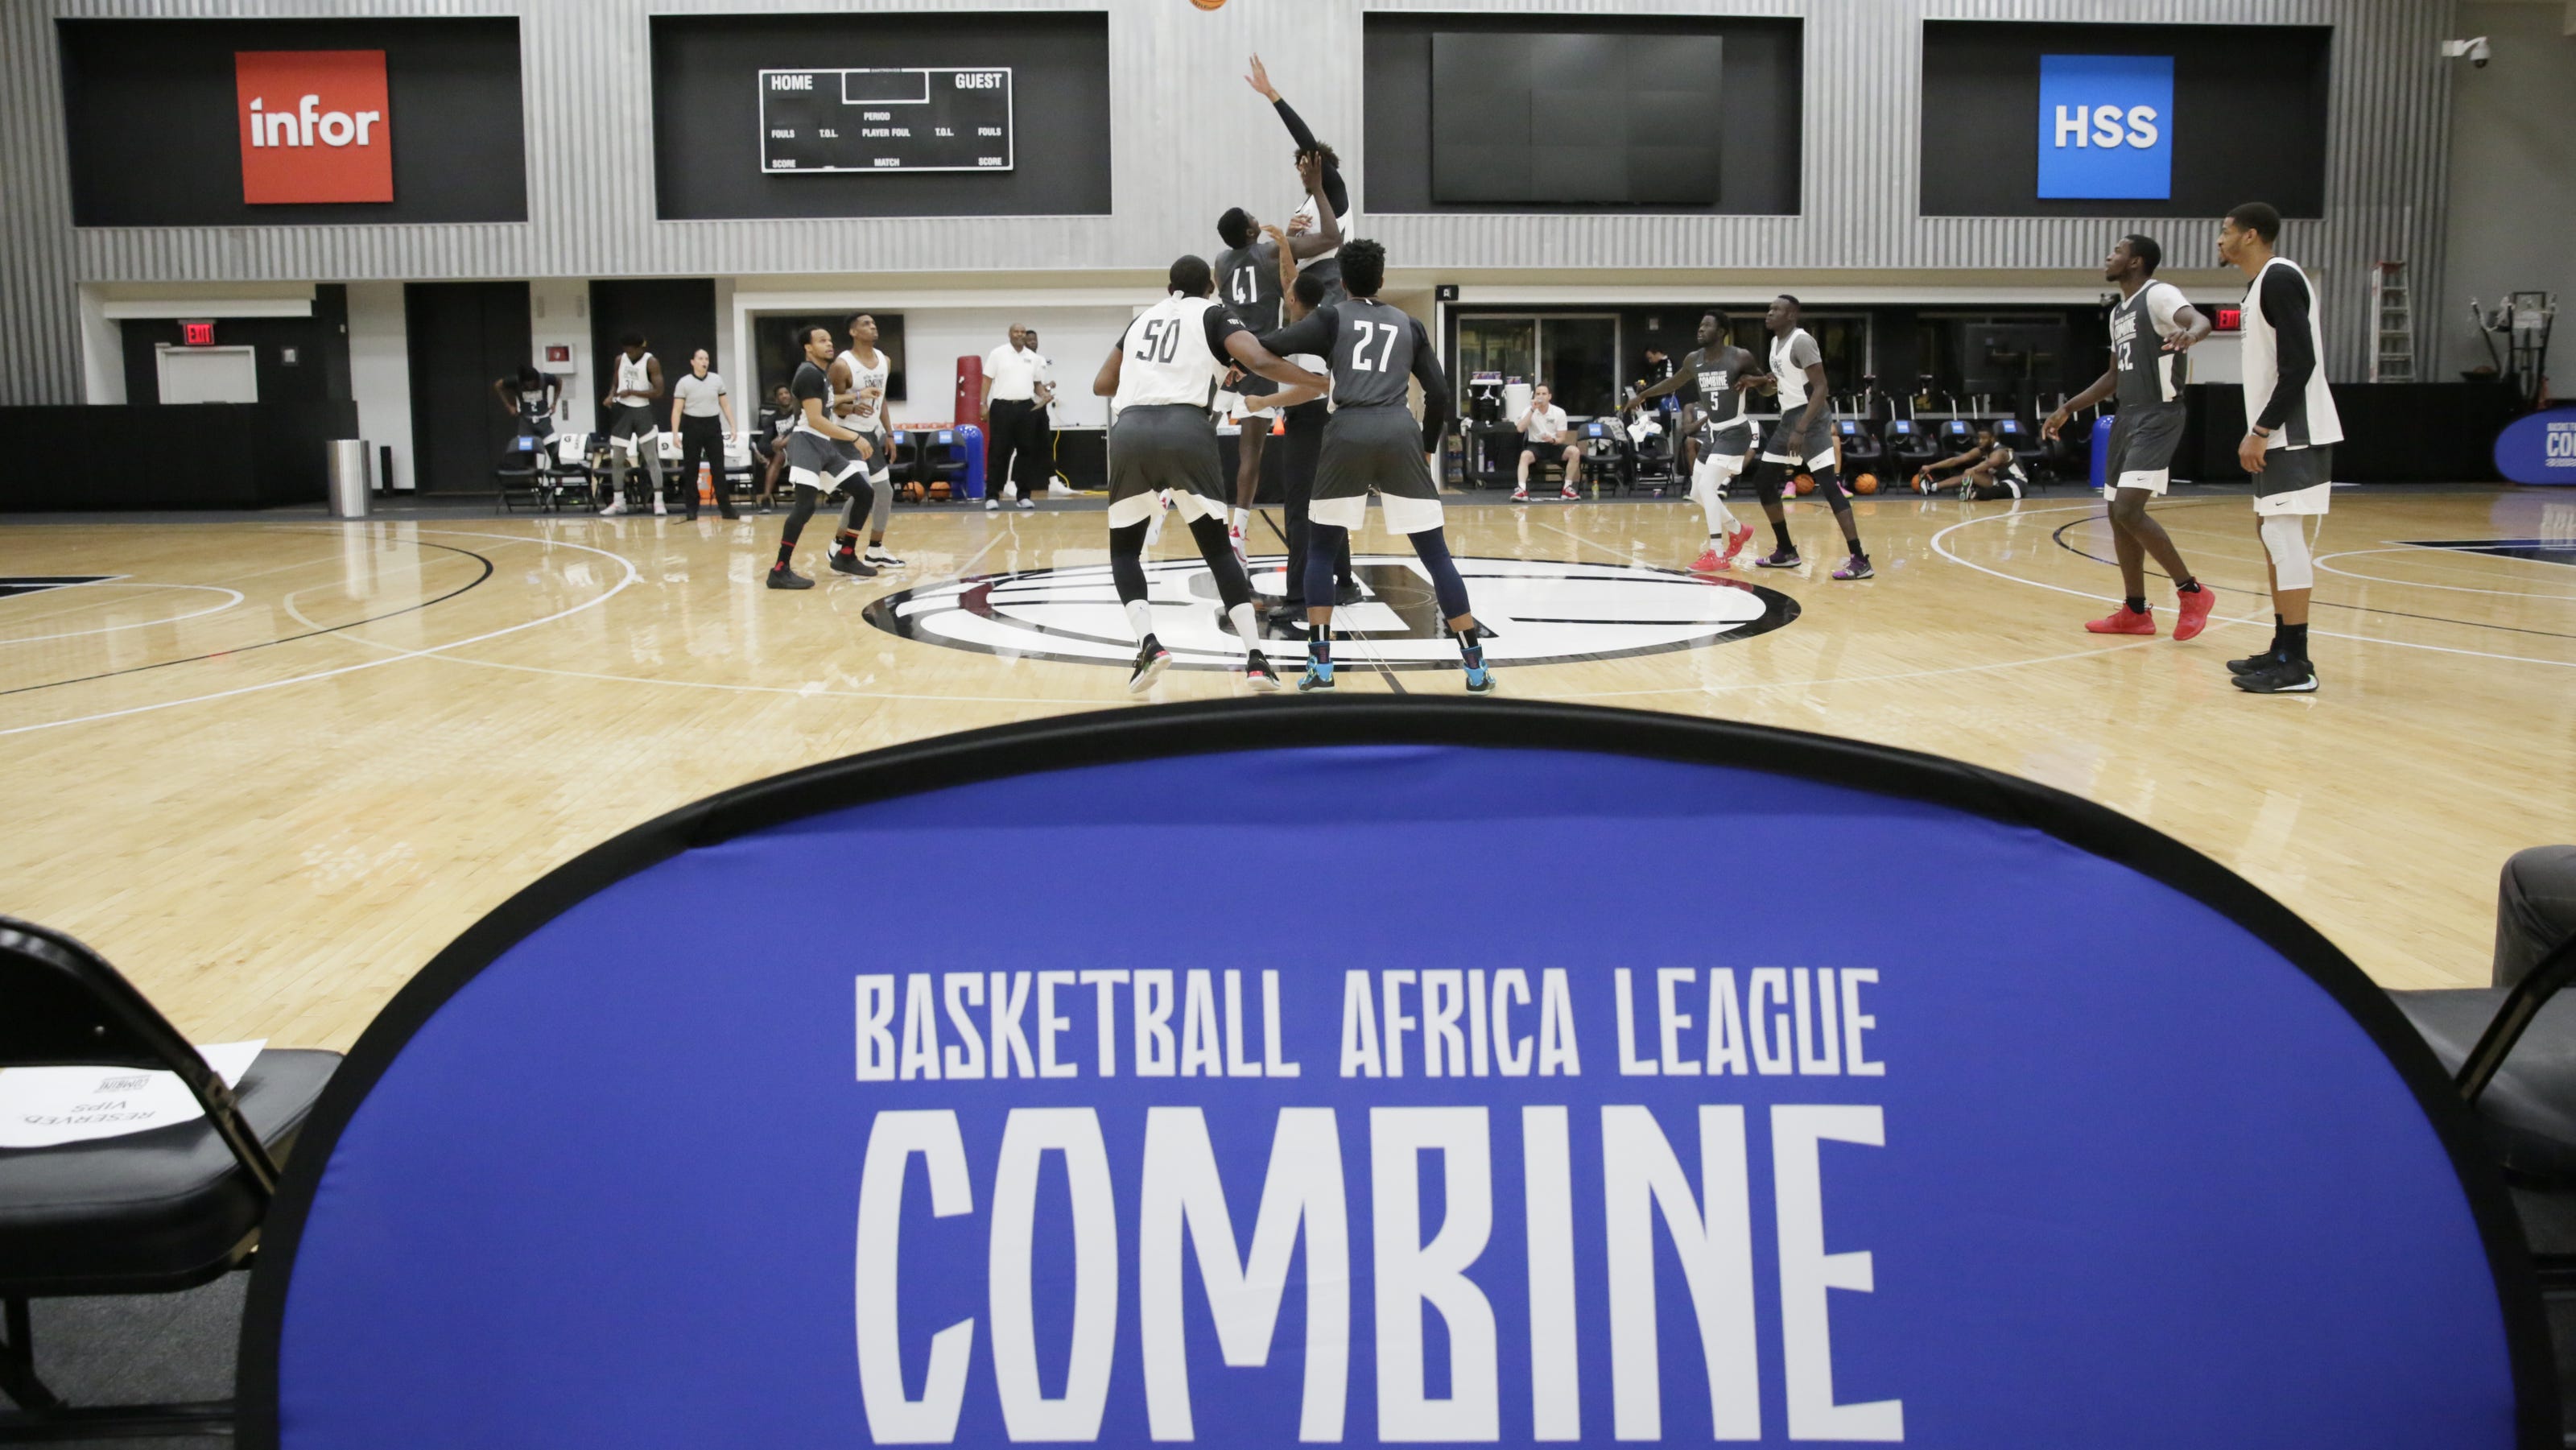 Comorama repertoire Republikeinse partij NBA to BAL: Why league is starting 'historic' league in Africa